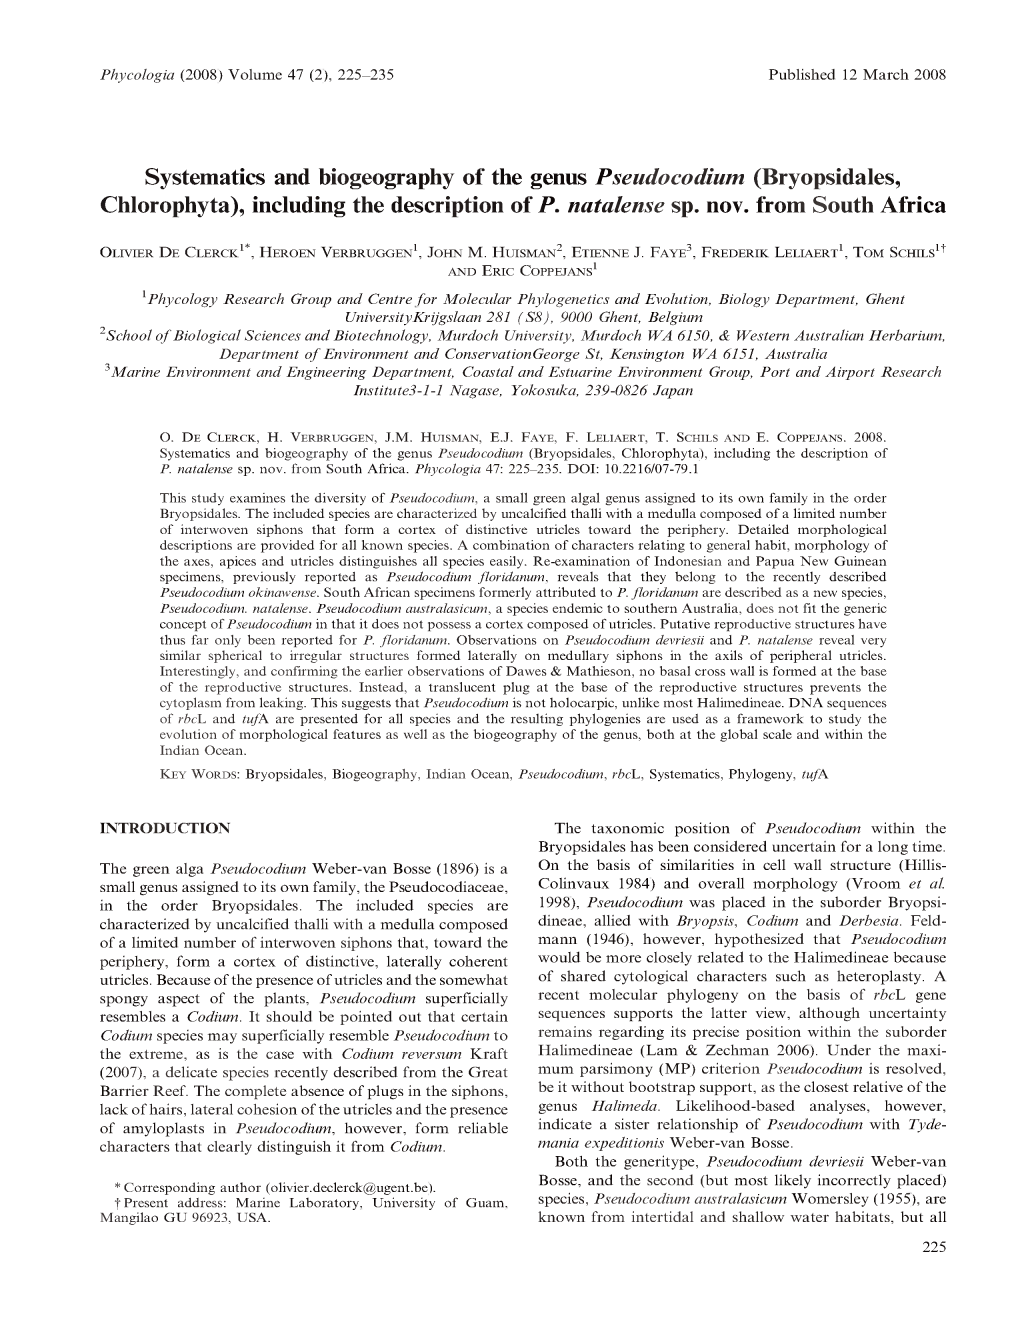 Systematics and Biogeography of the Genus Pseudocodium (Bryopsidales, Chlorophyta), Including the Description of P